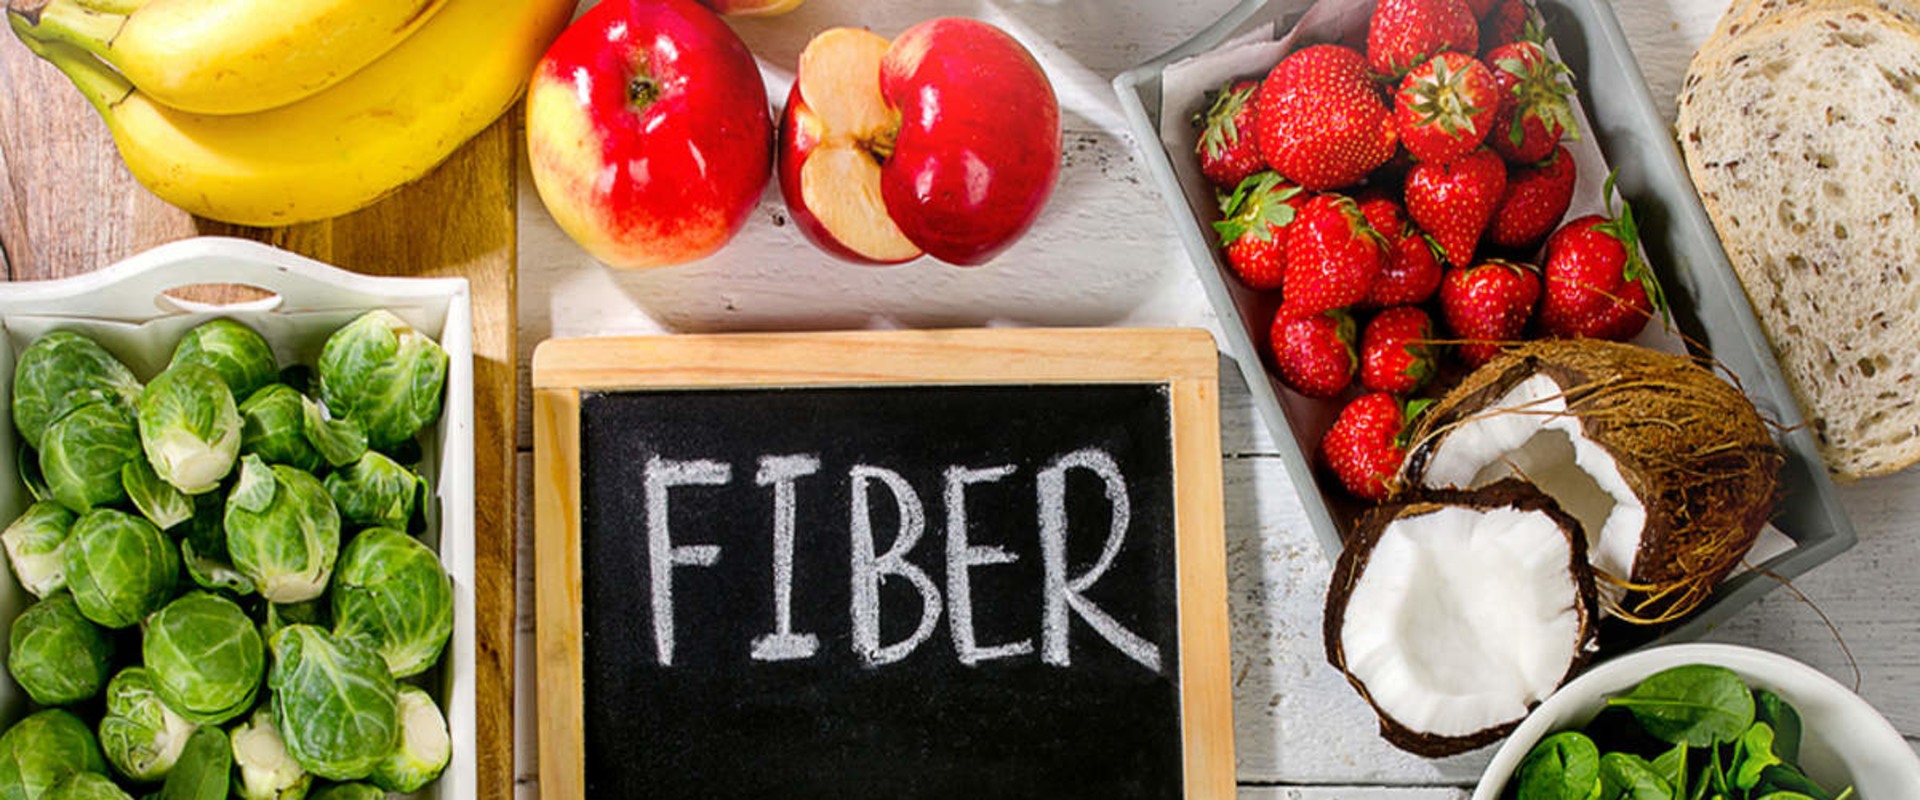 Eating More Fiber and Protein-Rich Foods for Belly Fat Loss